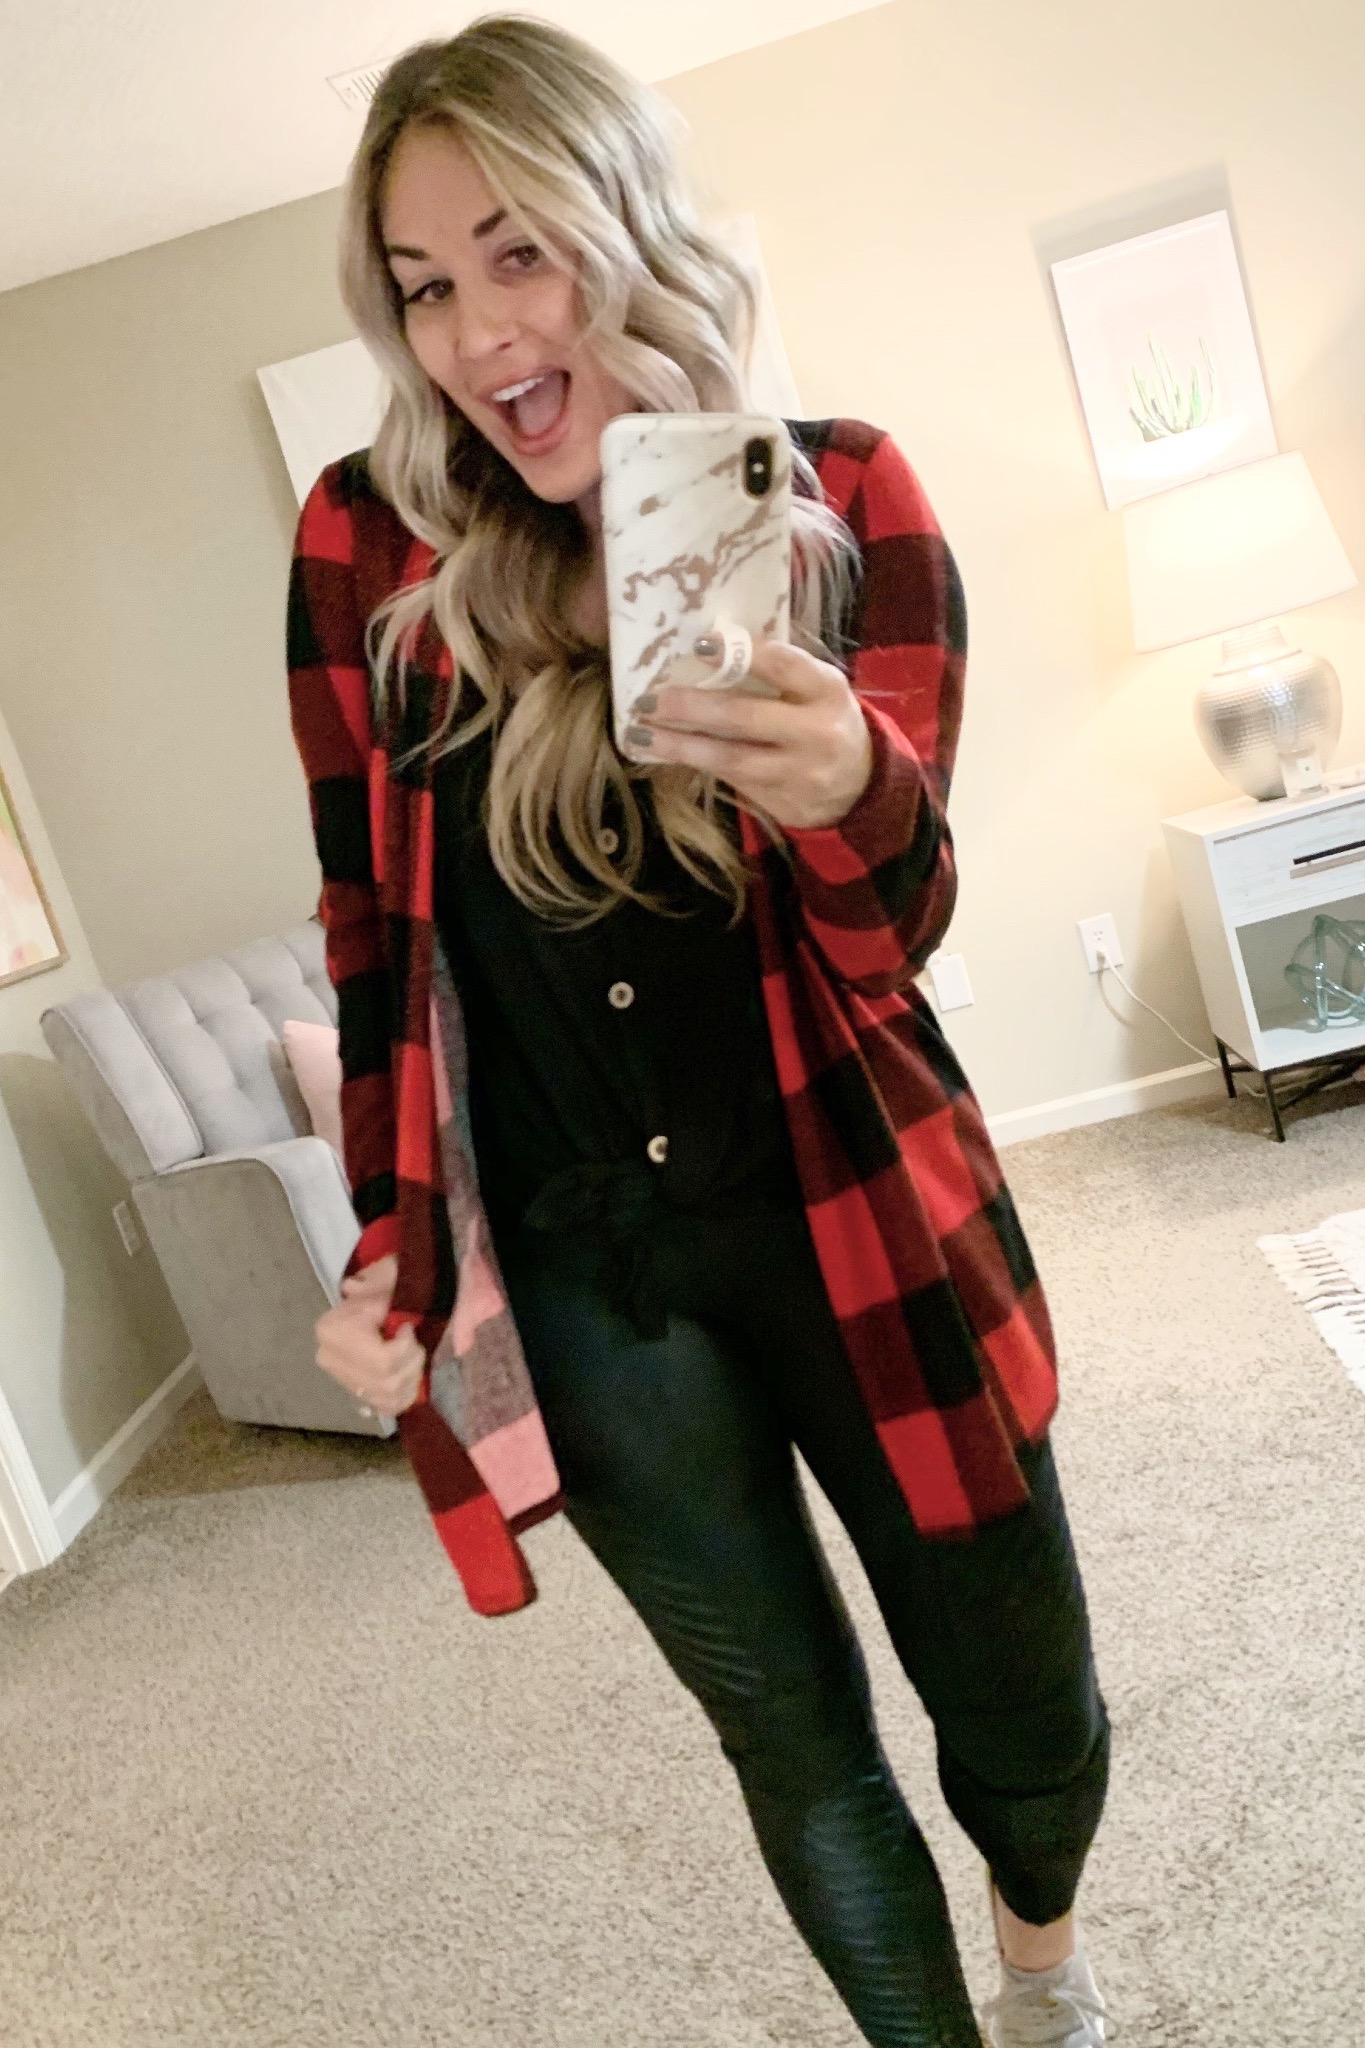 Fall Outfits: The Plaid Leggings Every Girl Needs - The Honeyed